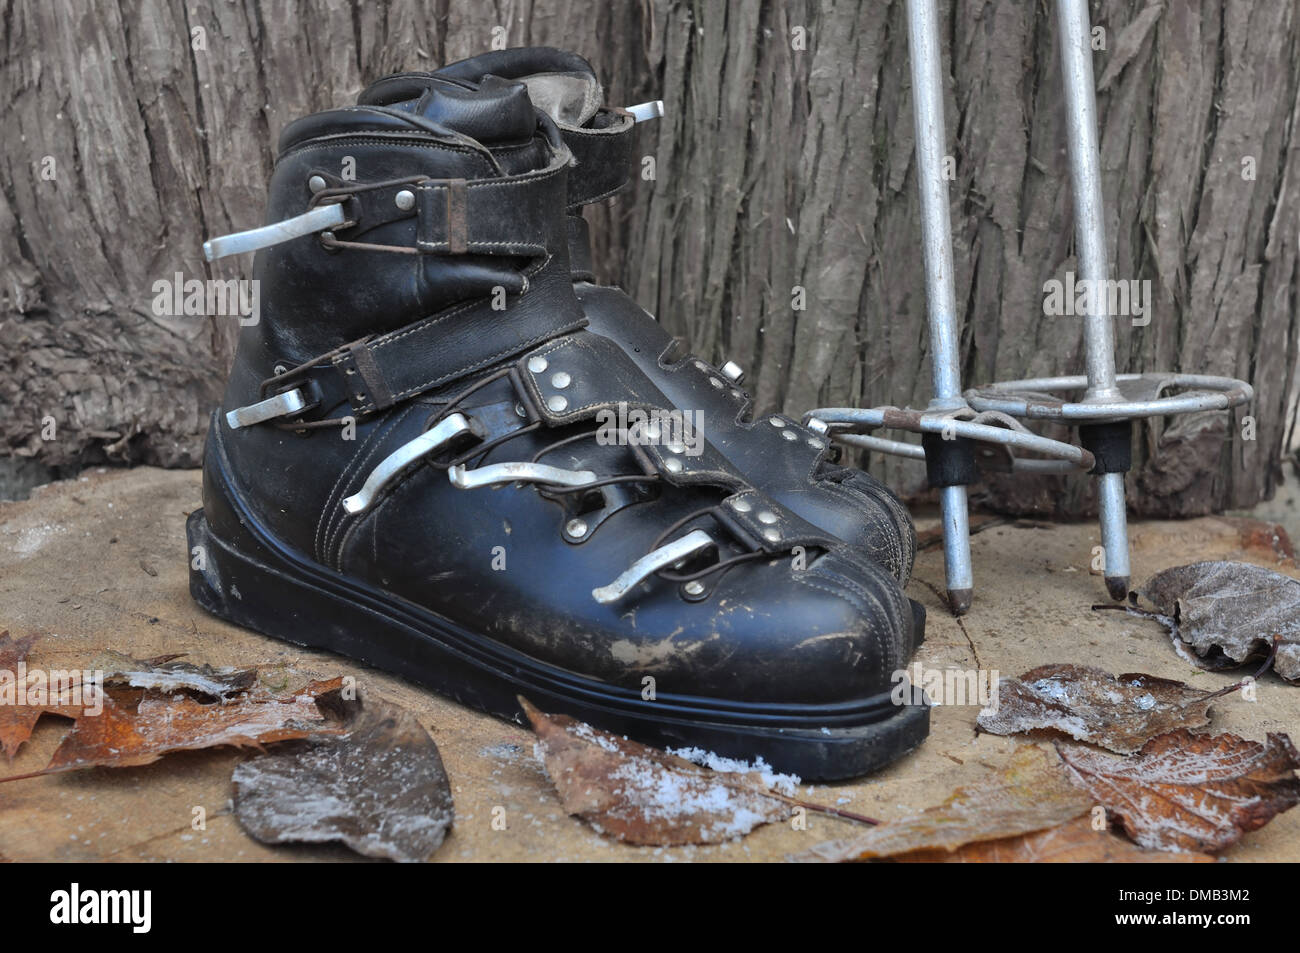 old ski boots in a rustic wooden setting Stock Photo